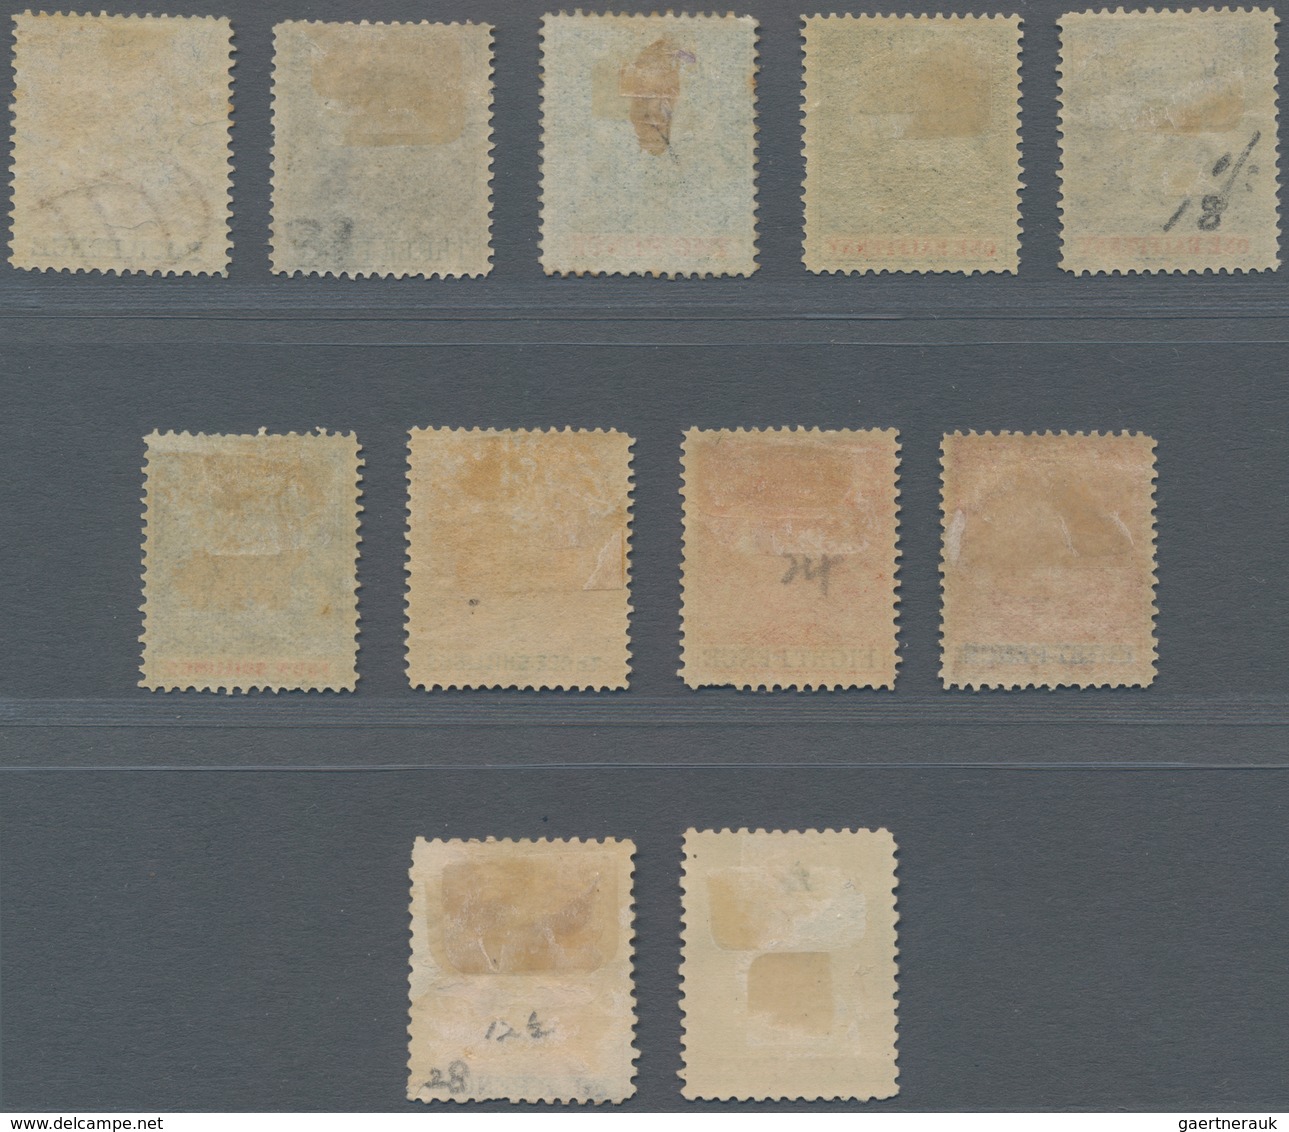 Britische Südafrika-Gesellschaft: 1892-95 'Coat Of Arms' Set Of 9 Up To 4s. Incl. Colour Shades, Plu - Unclassified